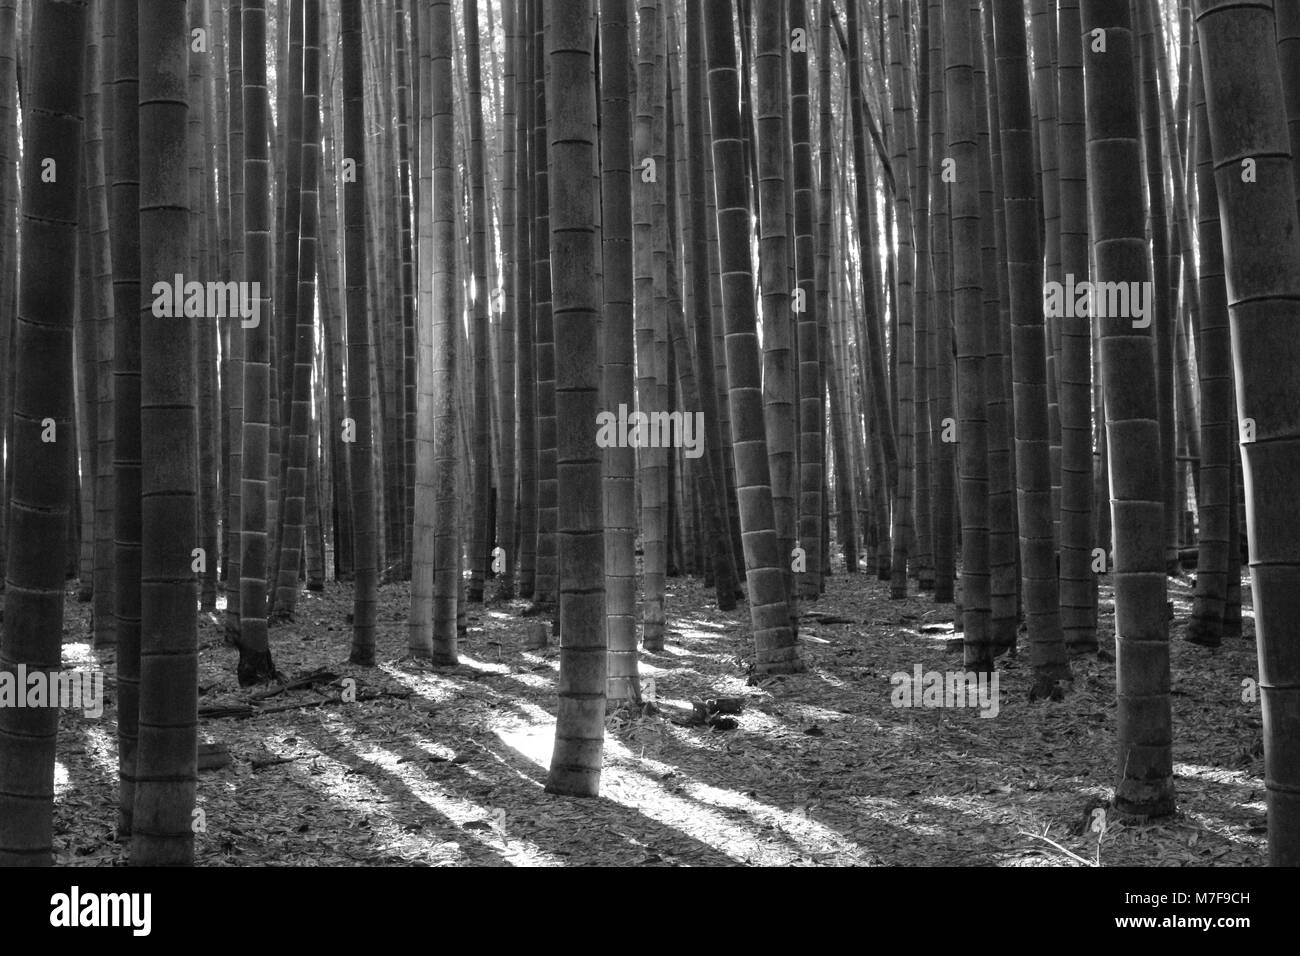 Green bamboo Black and White Stock Photos & Images - Alamy